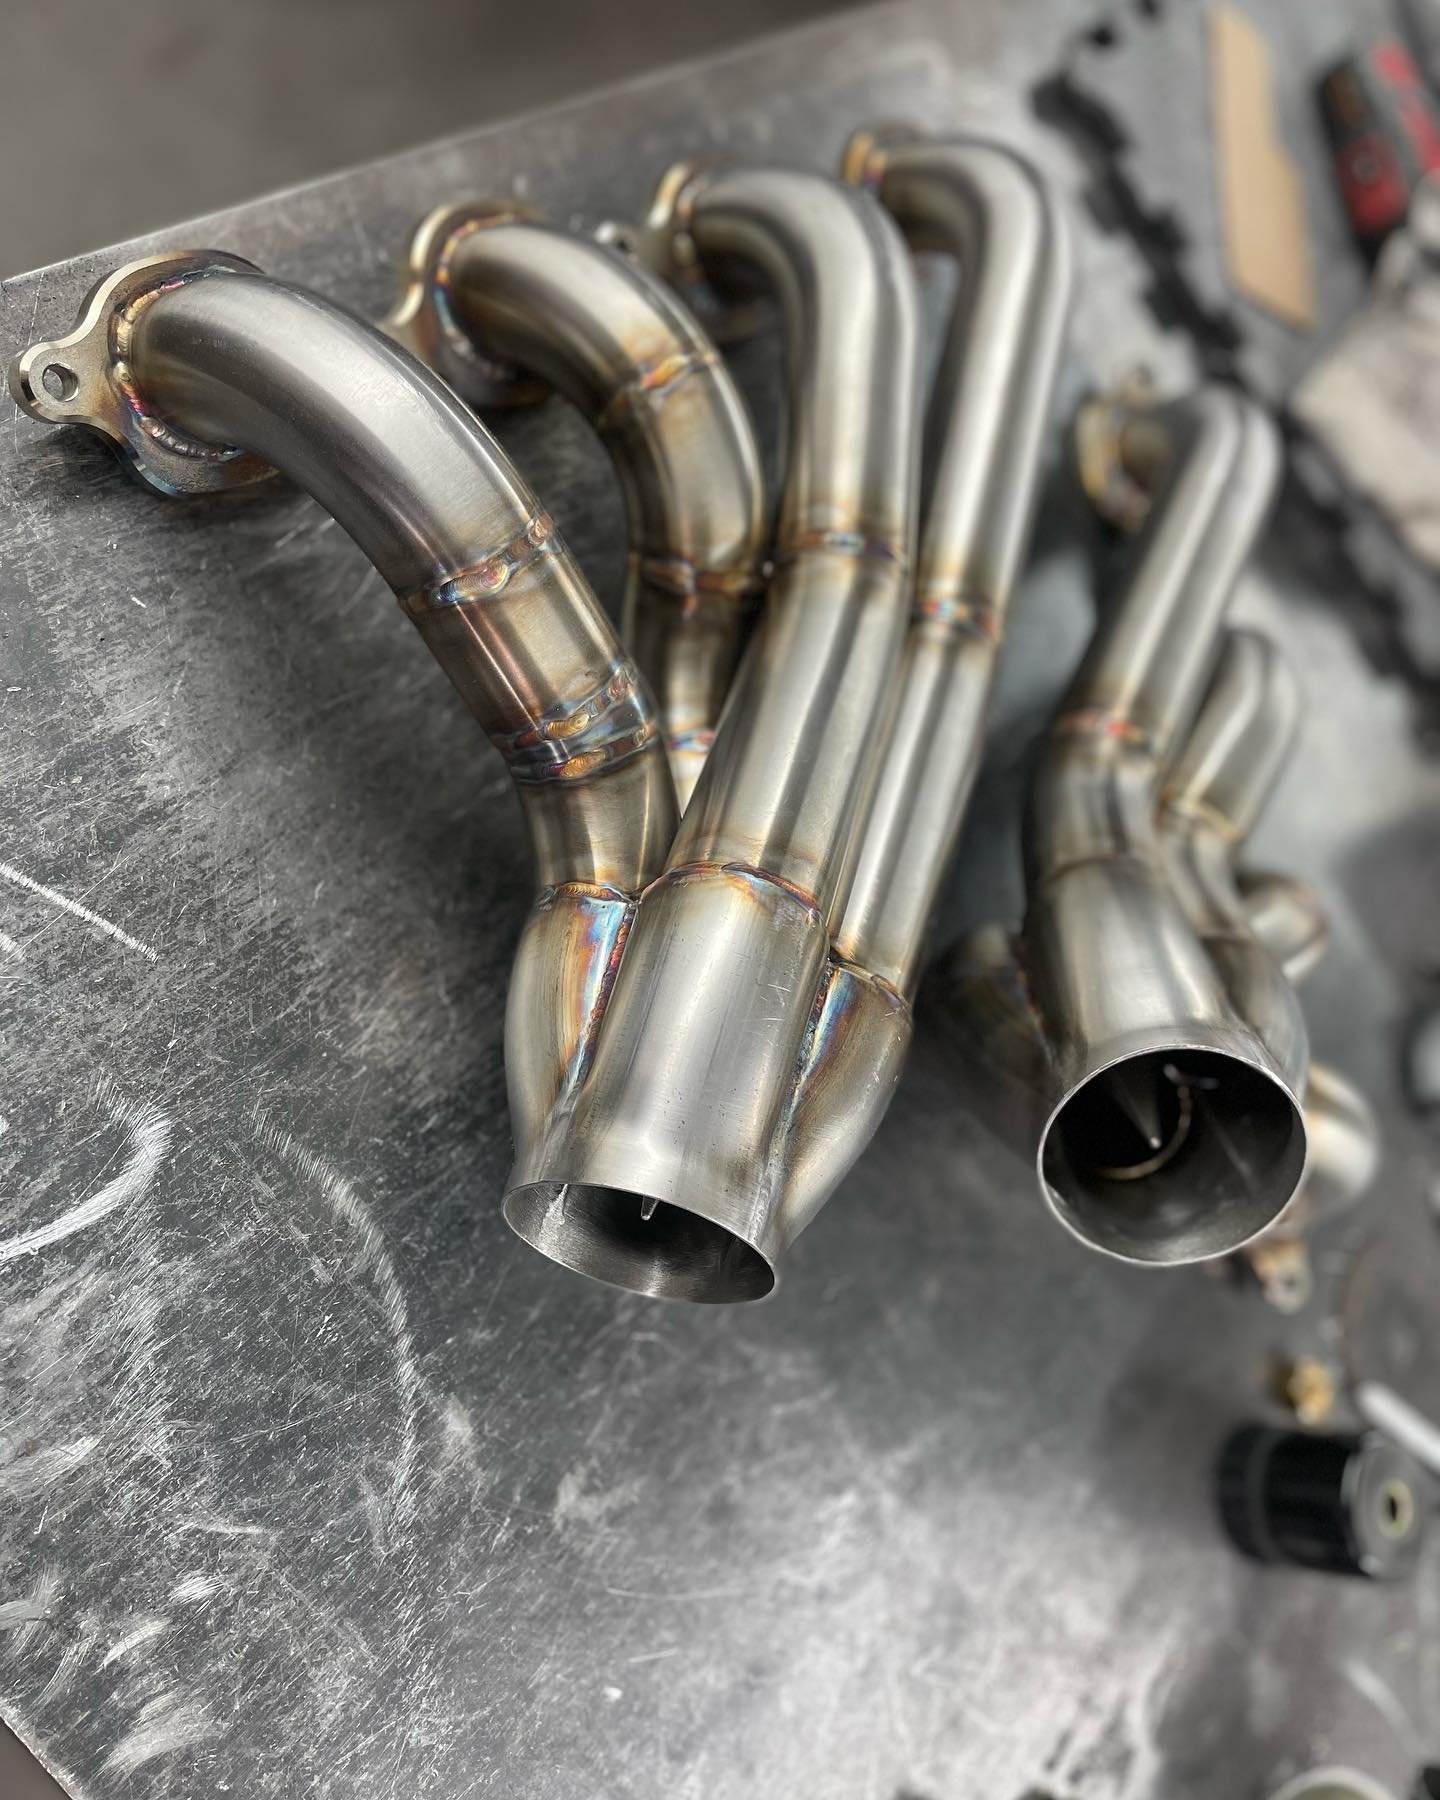 Another set of headers for one of the Jeep wrangler elite builds here in the shop.  @alldayfab got this set built for @sgtjeep will be running @mastmotorsports built 600hp l8e lt engine.  These are 1 7/8 tubes with a 25 degree merge collector conside